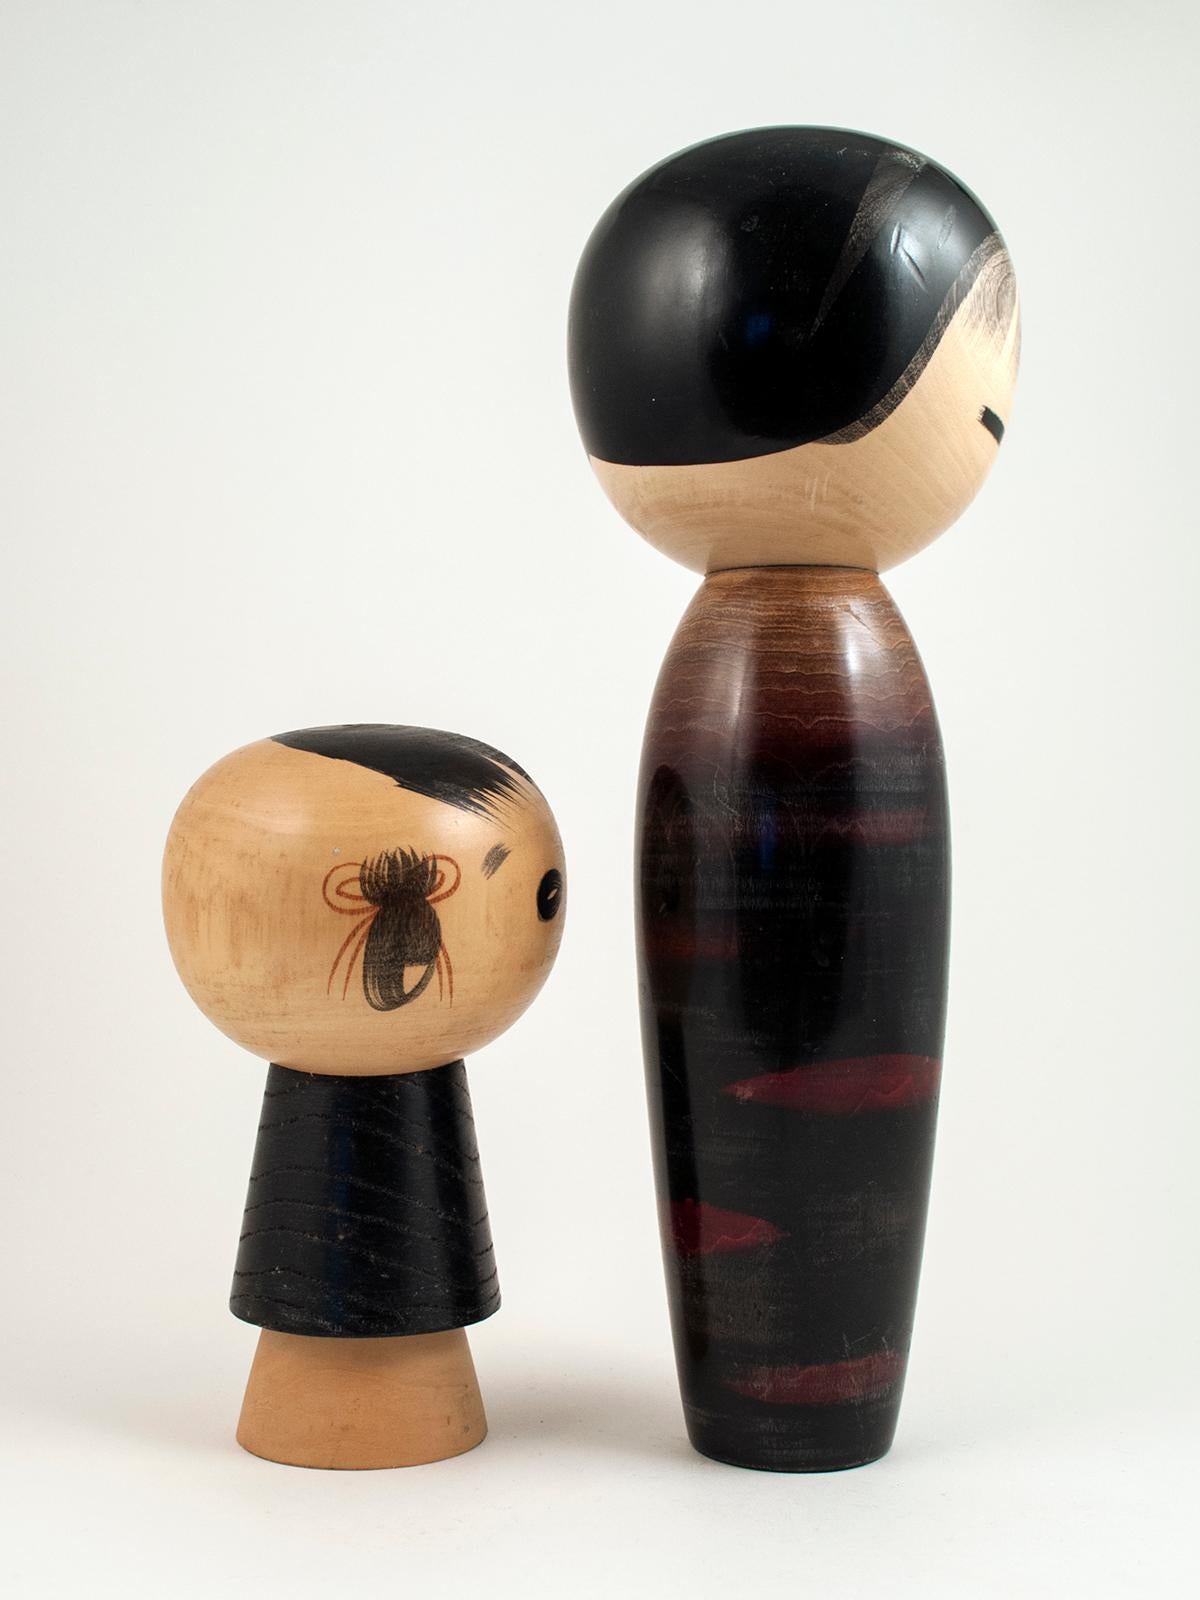 Two 1960s modern creative Kokeshi Dolls by Masao Watanabe, Japan

Masao Watanabe (1917-2007) was a highly regarded artist of the Sosaku Kokeshi Movement, receiving numerous awards during his career.

The first doll is named 